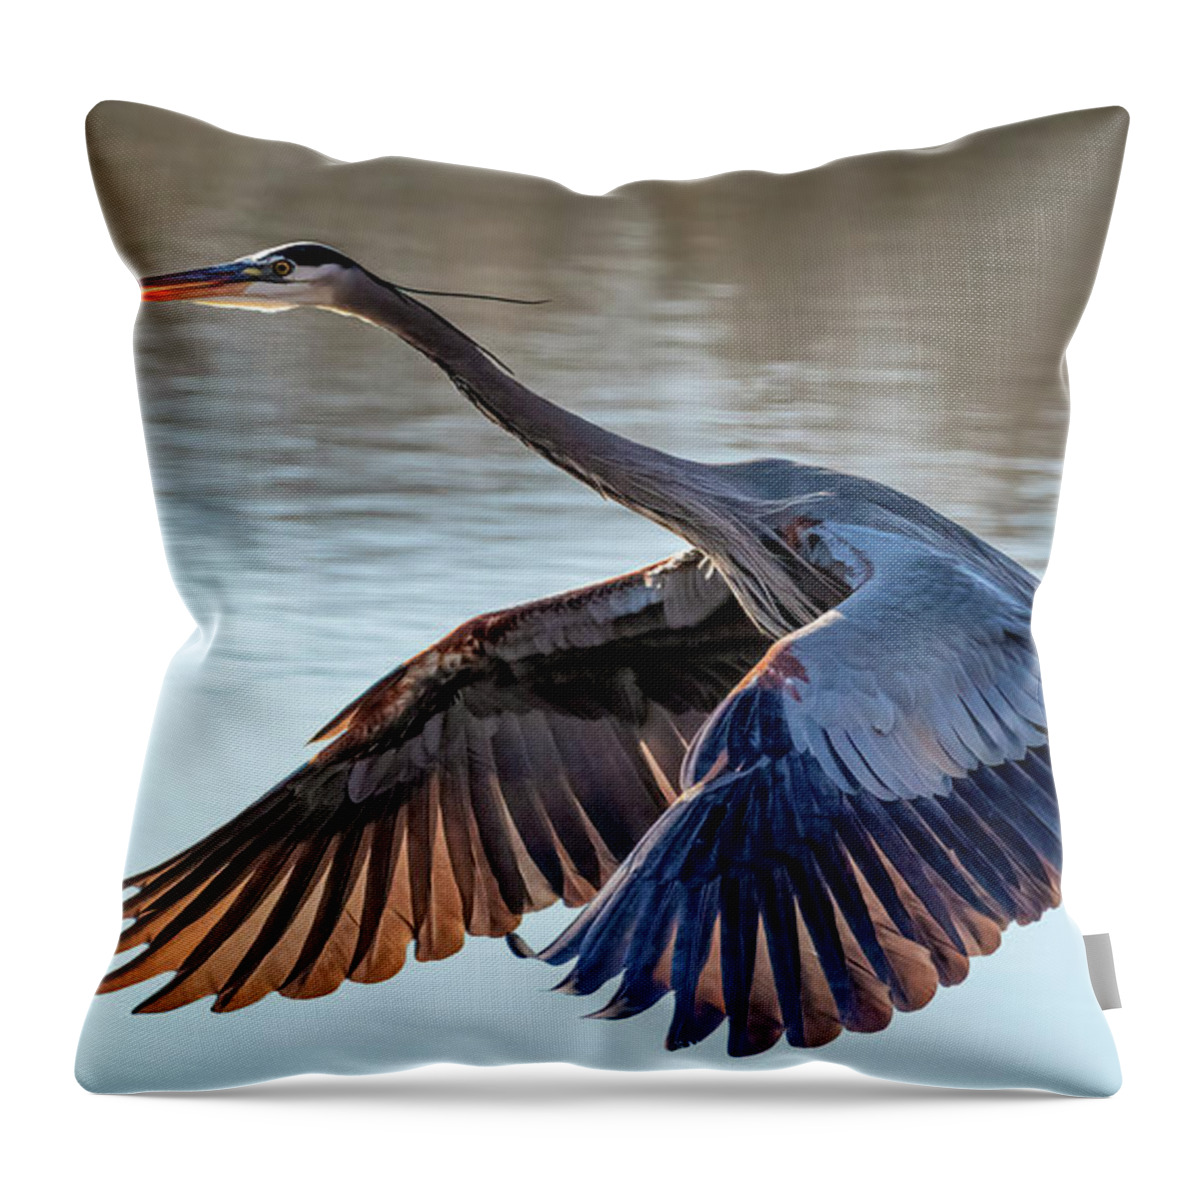 Heron Throw Pillow featuring the photograph Backlit Feathers by James Barber